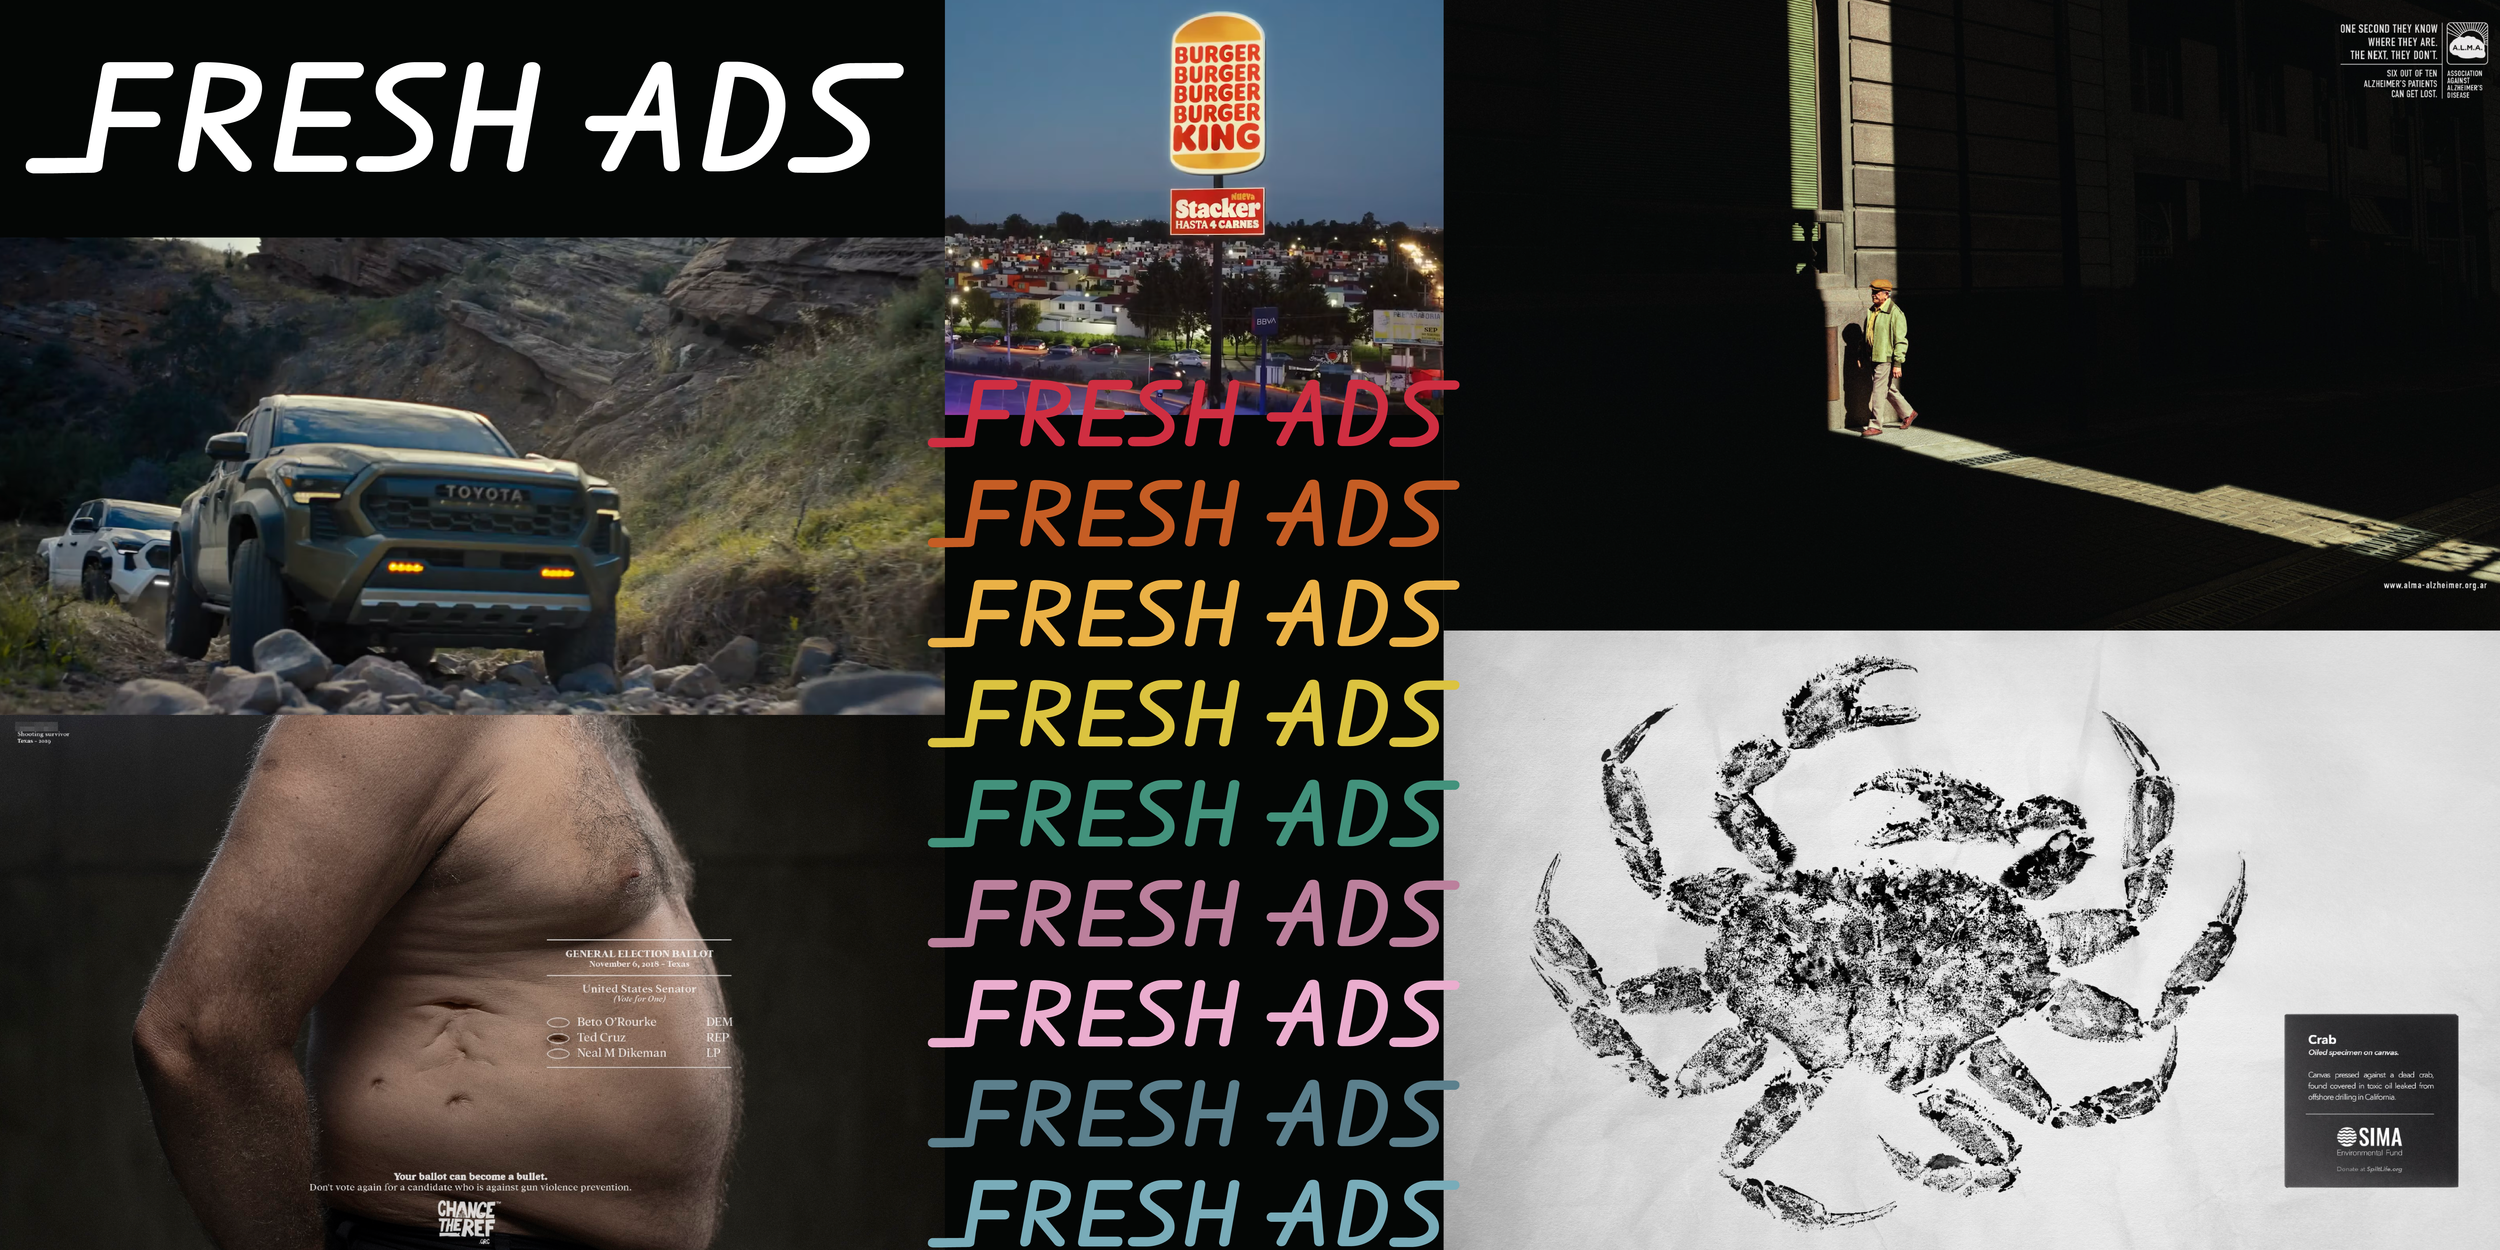   Watch the latest ads  